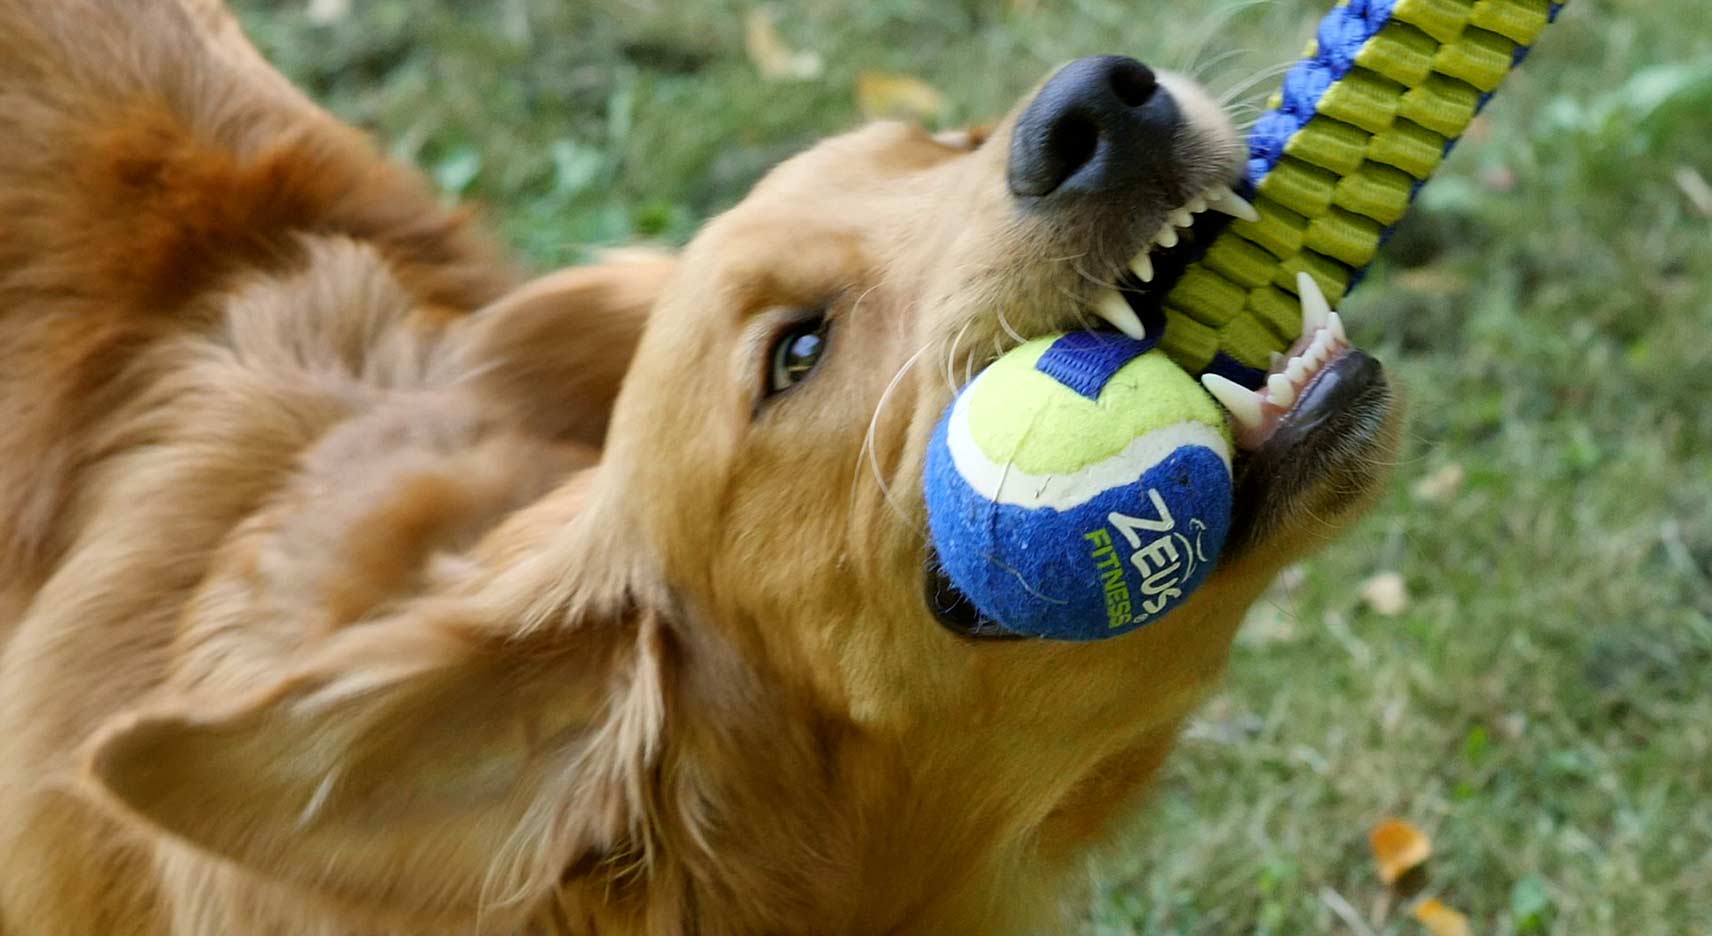 How to make tug-of-war with your dog even more fun